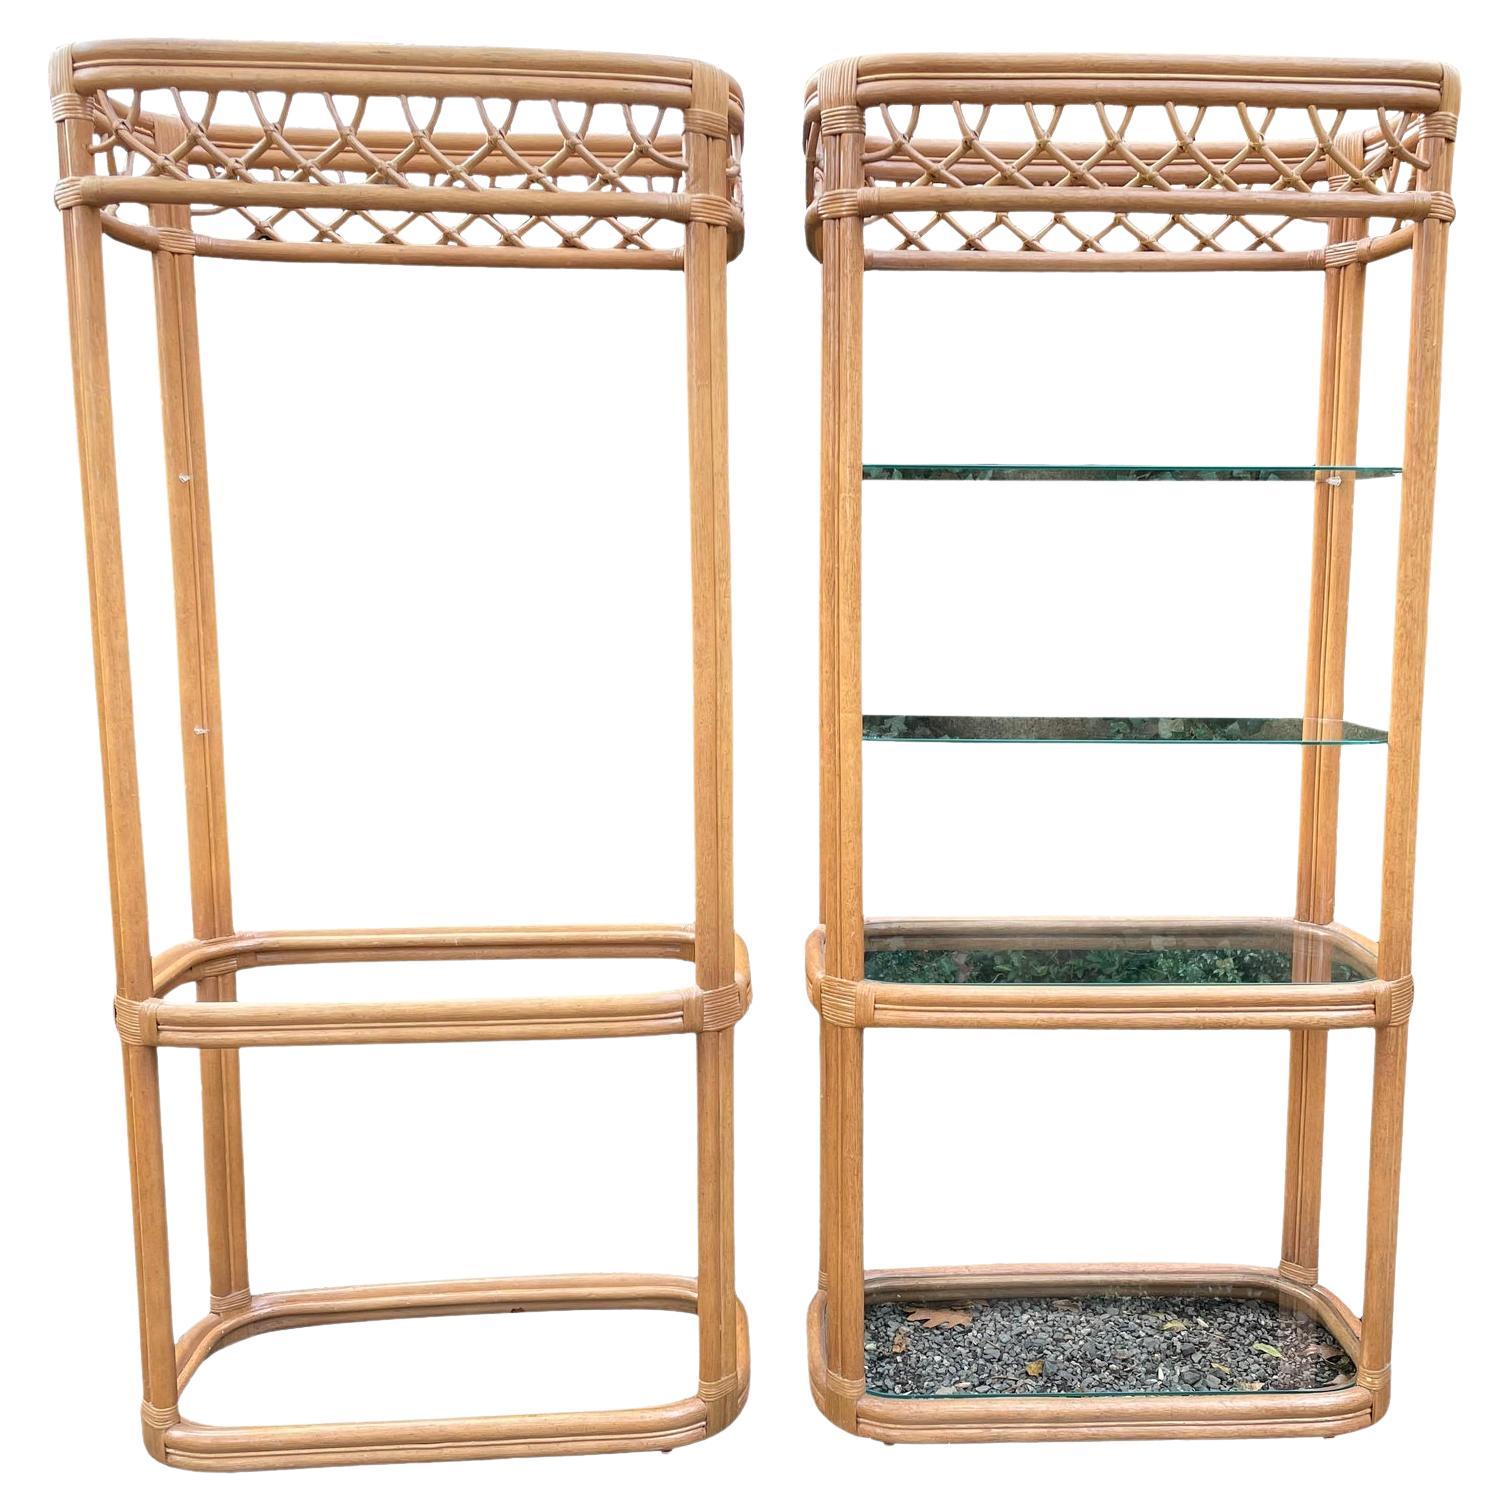 Pair of Stunning Wrapped Bamboo and Glass Bookshelves Etageres For Sale